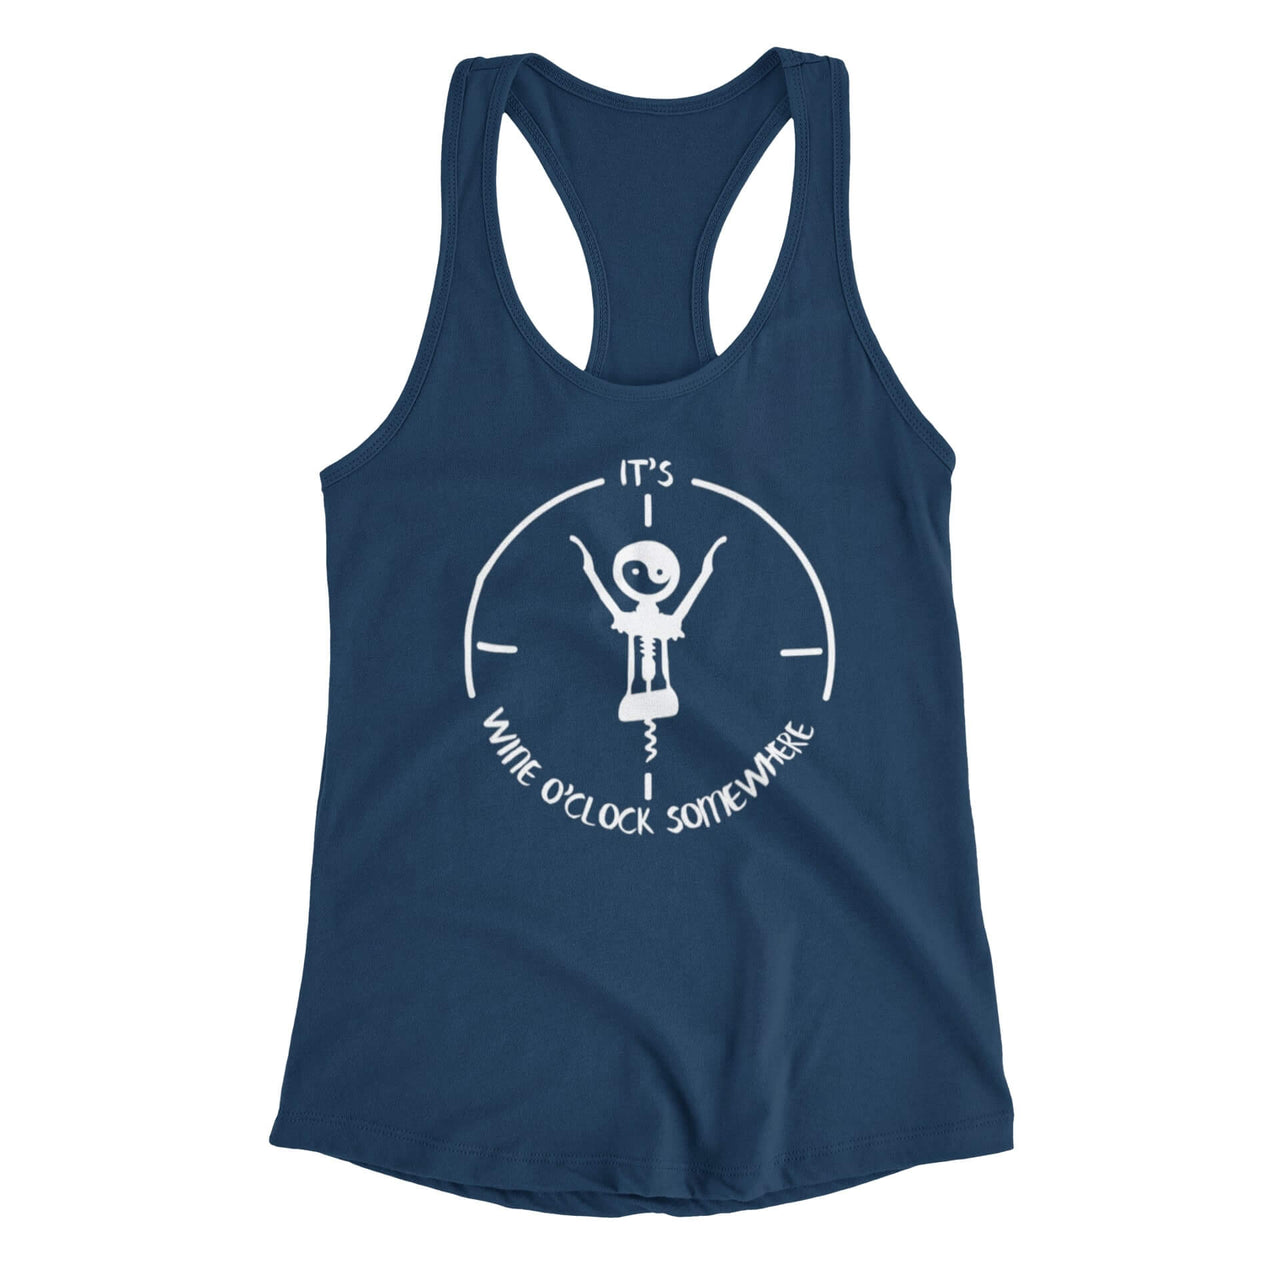 Navy  Racerback T-shirt featuring the text 'It's wine o'clock somewhere,' accompanied by an image of a wine cork as the hands of a clock, with a yin yang symbol on the face. Designed by WooHoo Apparel.